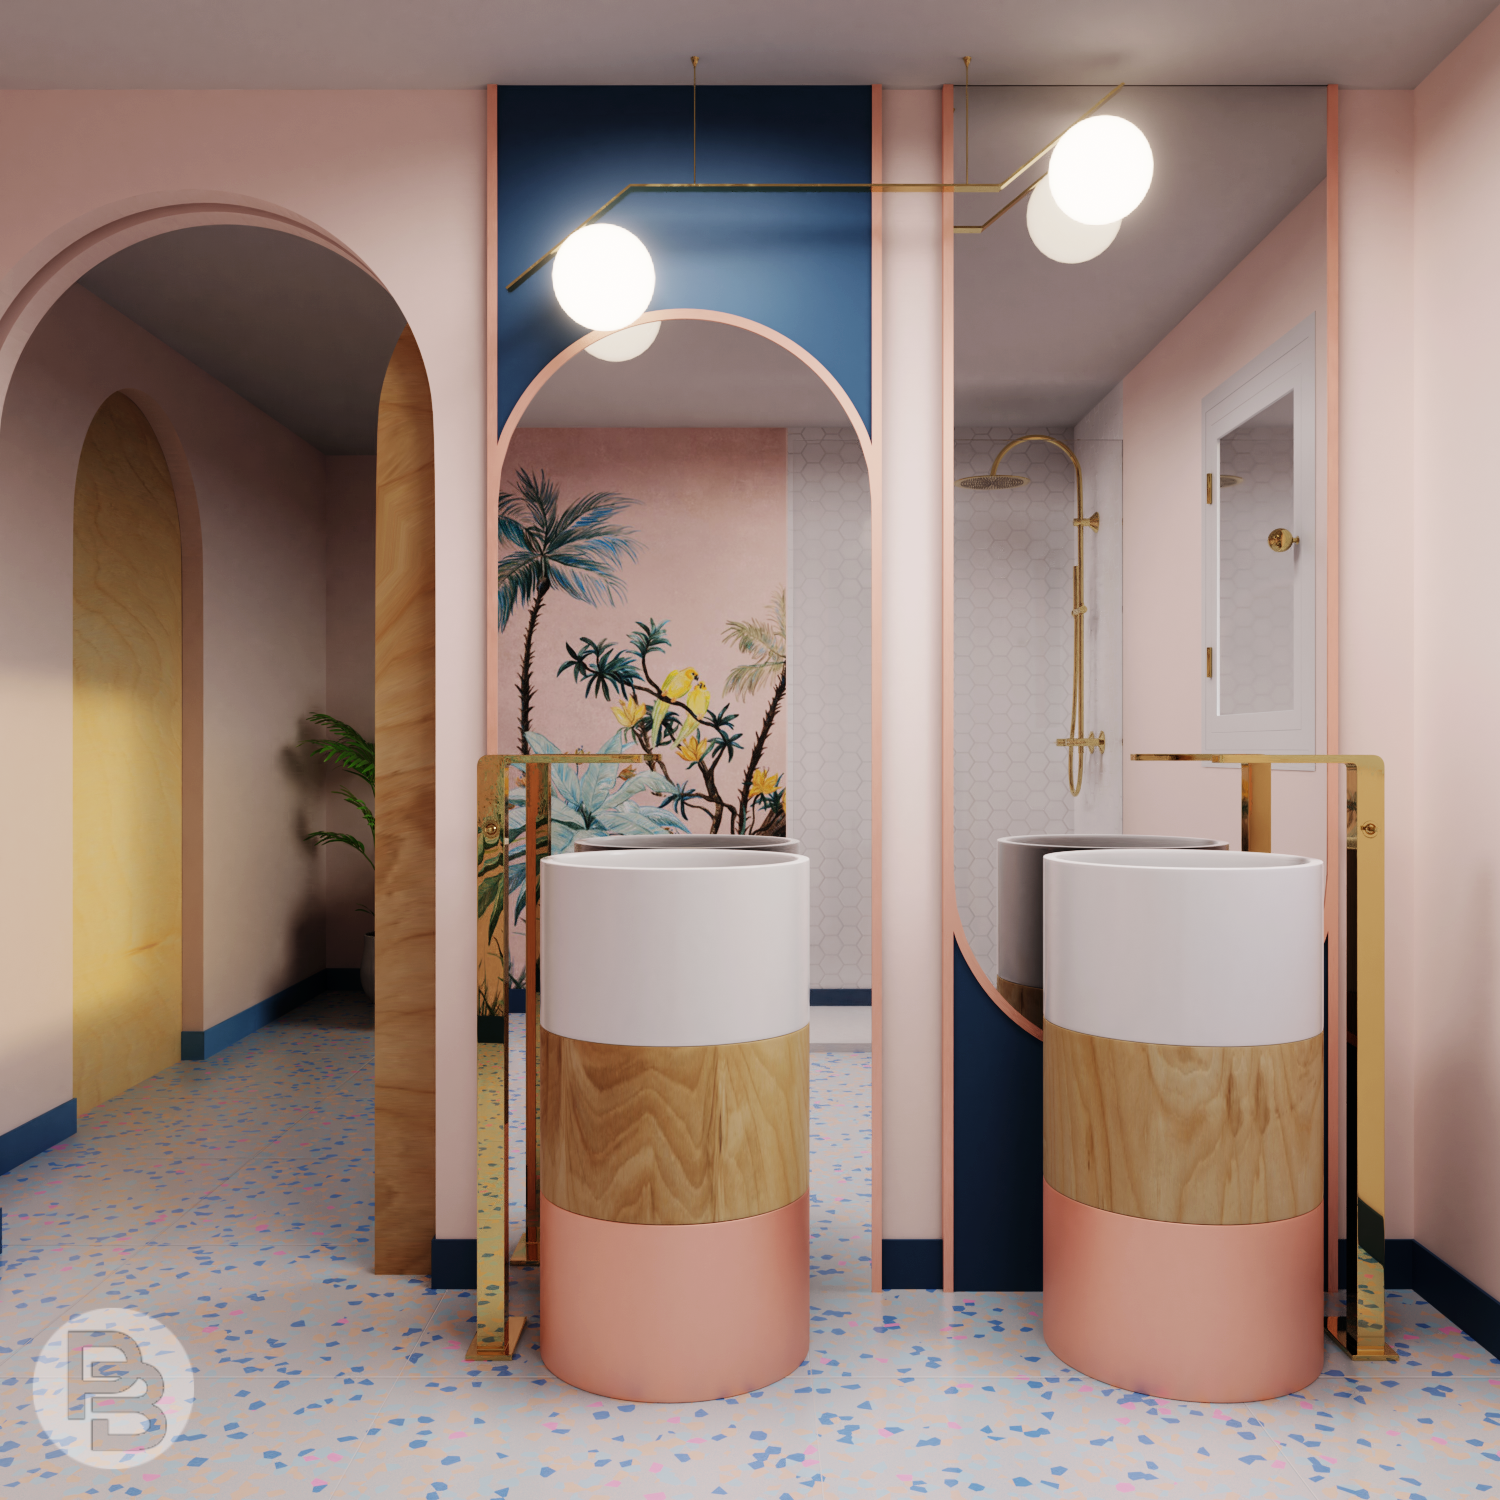 Bathroom – Private project by PB 3D Render